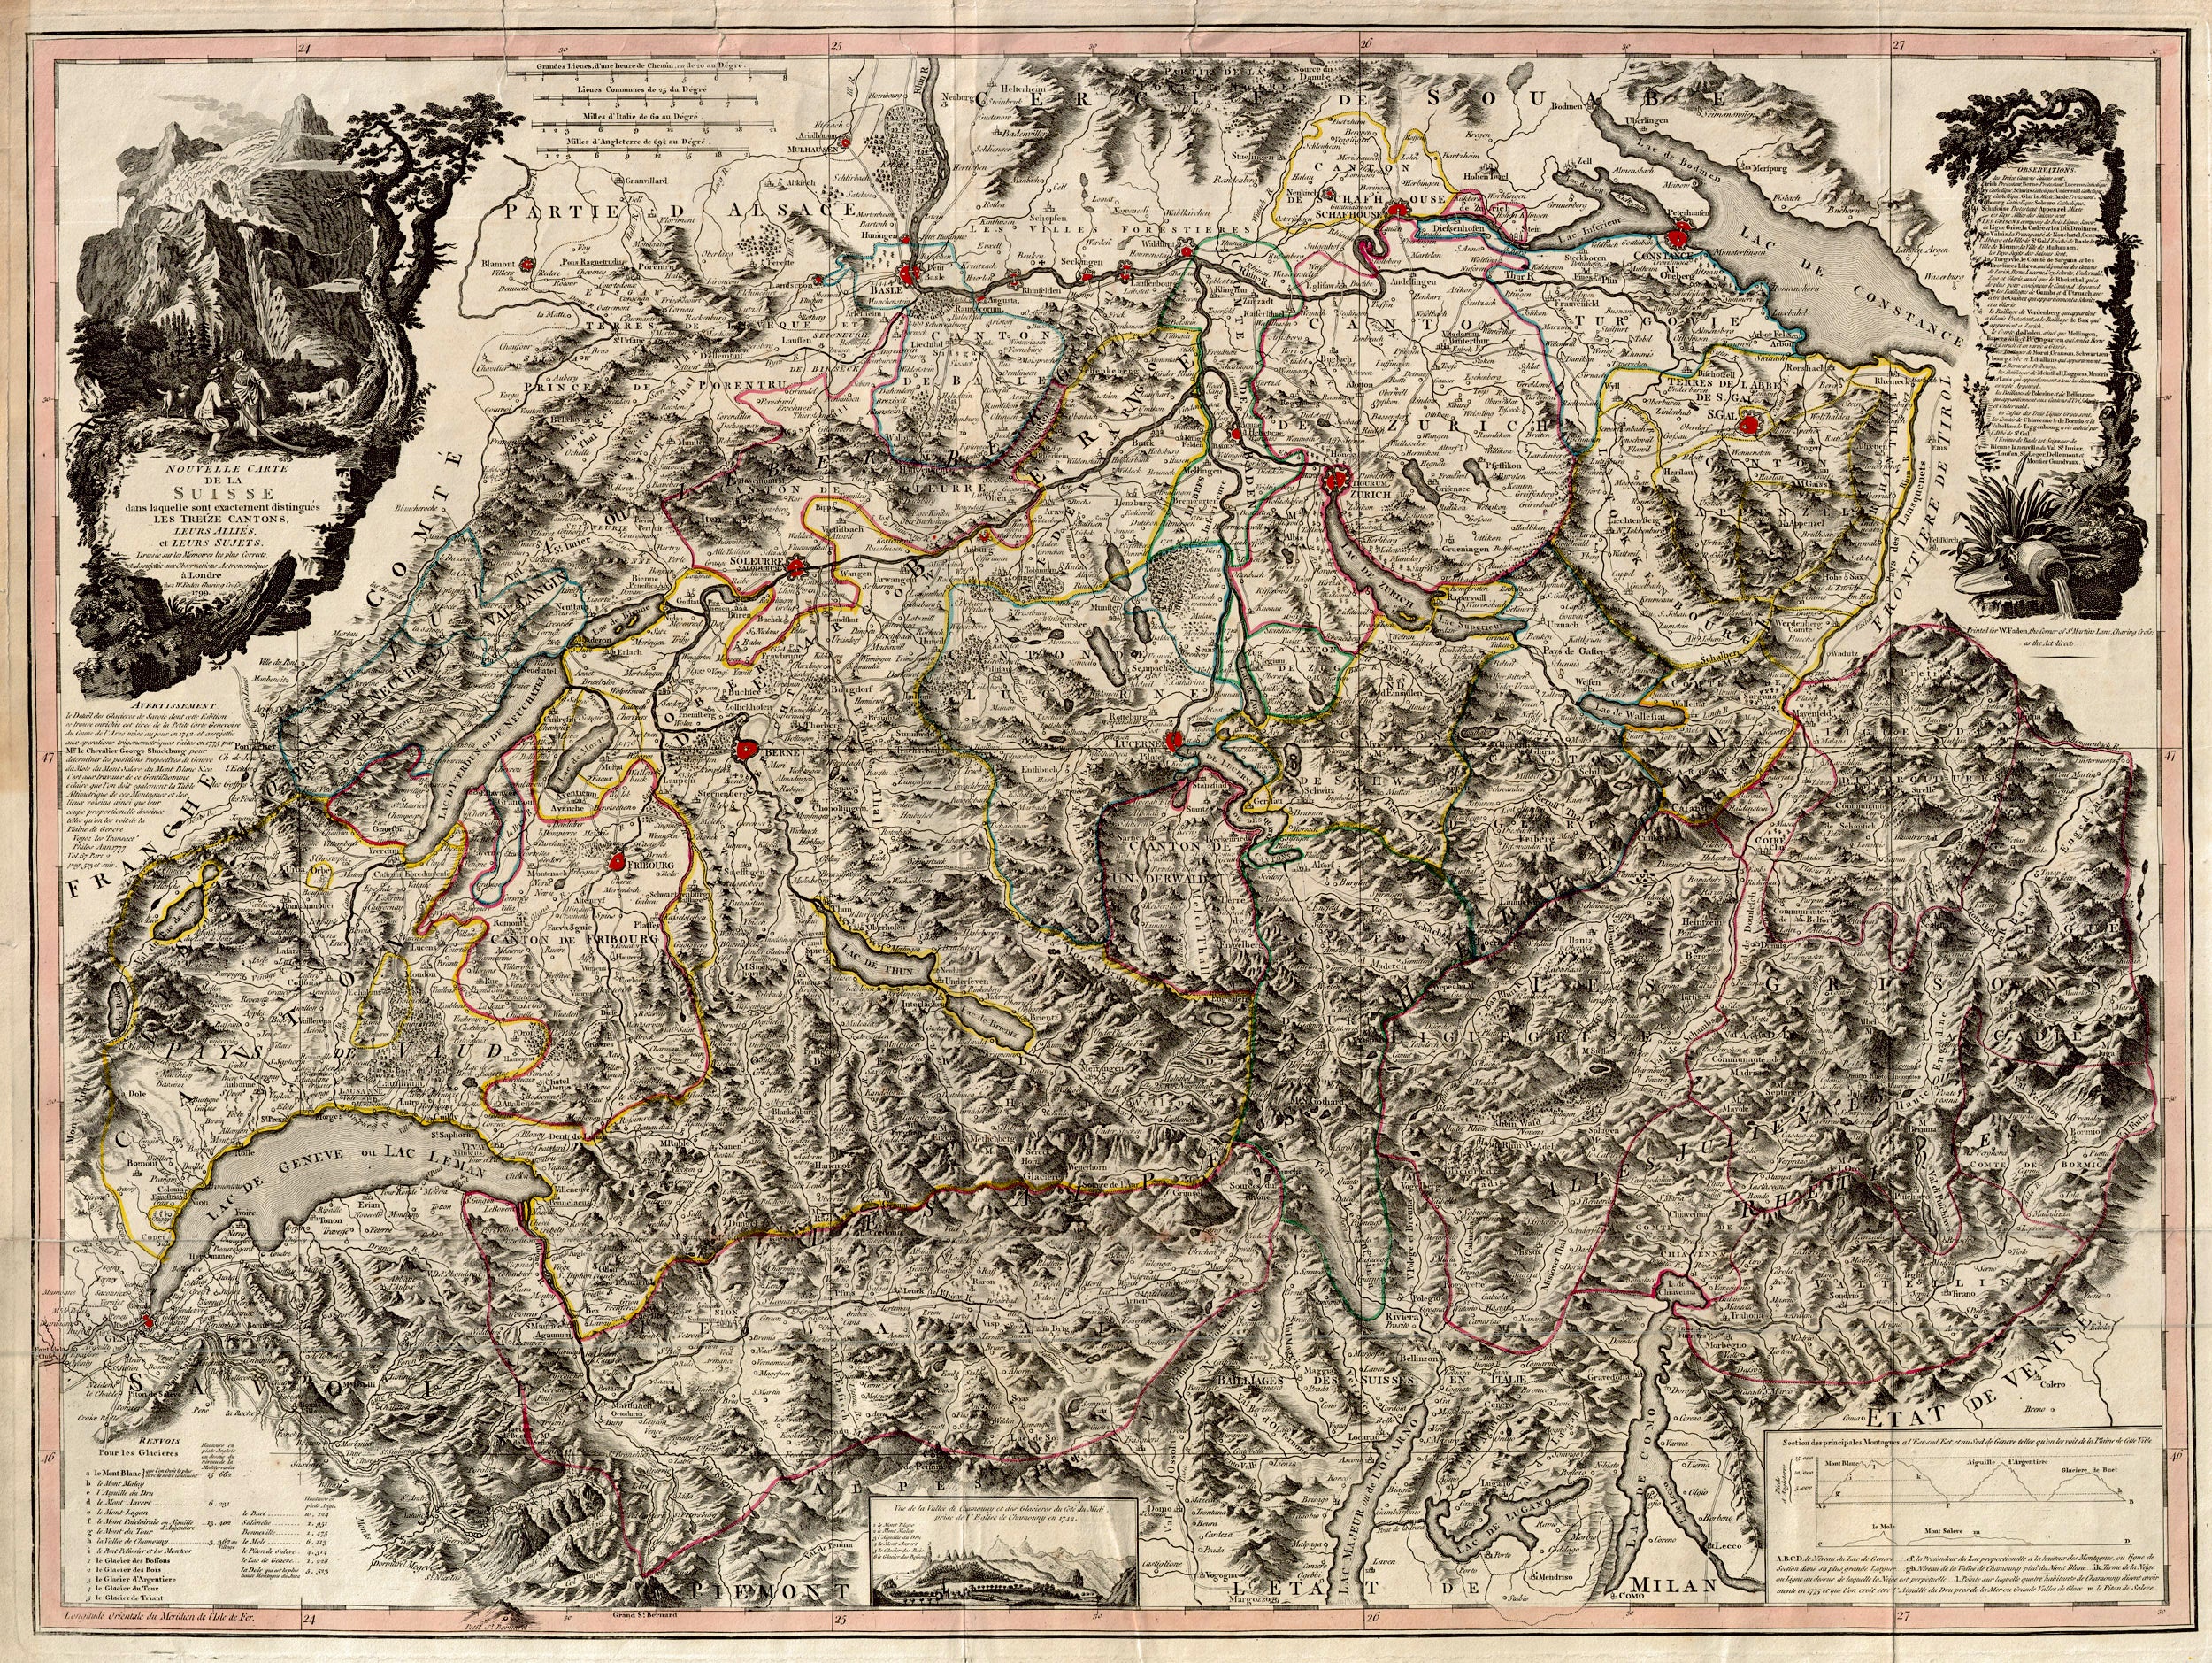 (Switzerland) Nouvelle Carte De La Suisse dans laquelle sont..., Faden, 1799 A stunning large engraving for one of the bigger cartographic challenges in depicting the lands of Europe, mapping the terrain of Switzerland. This detailed, dark copperplate engraving illustrates the Alps and valleys, the lakes and drainages, as well as the roads, cities towns and canton boundaries. It's an amazing work, complimented by nice cartouches. 